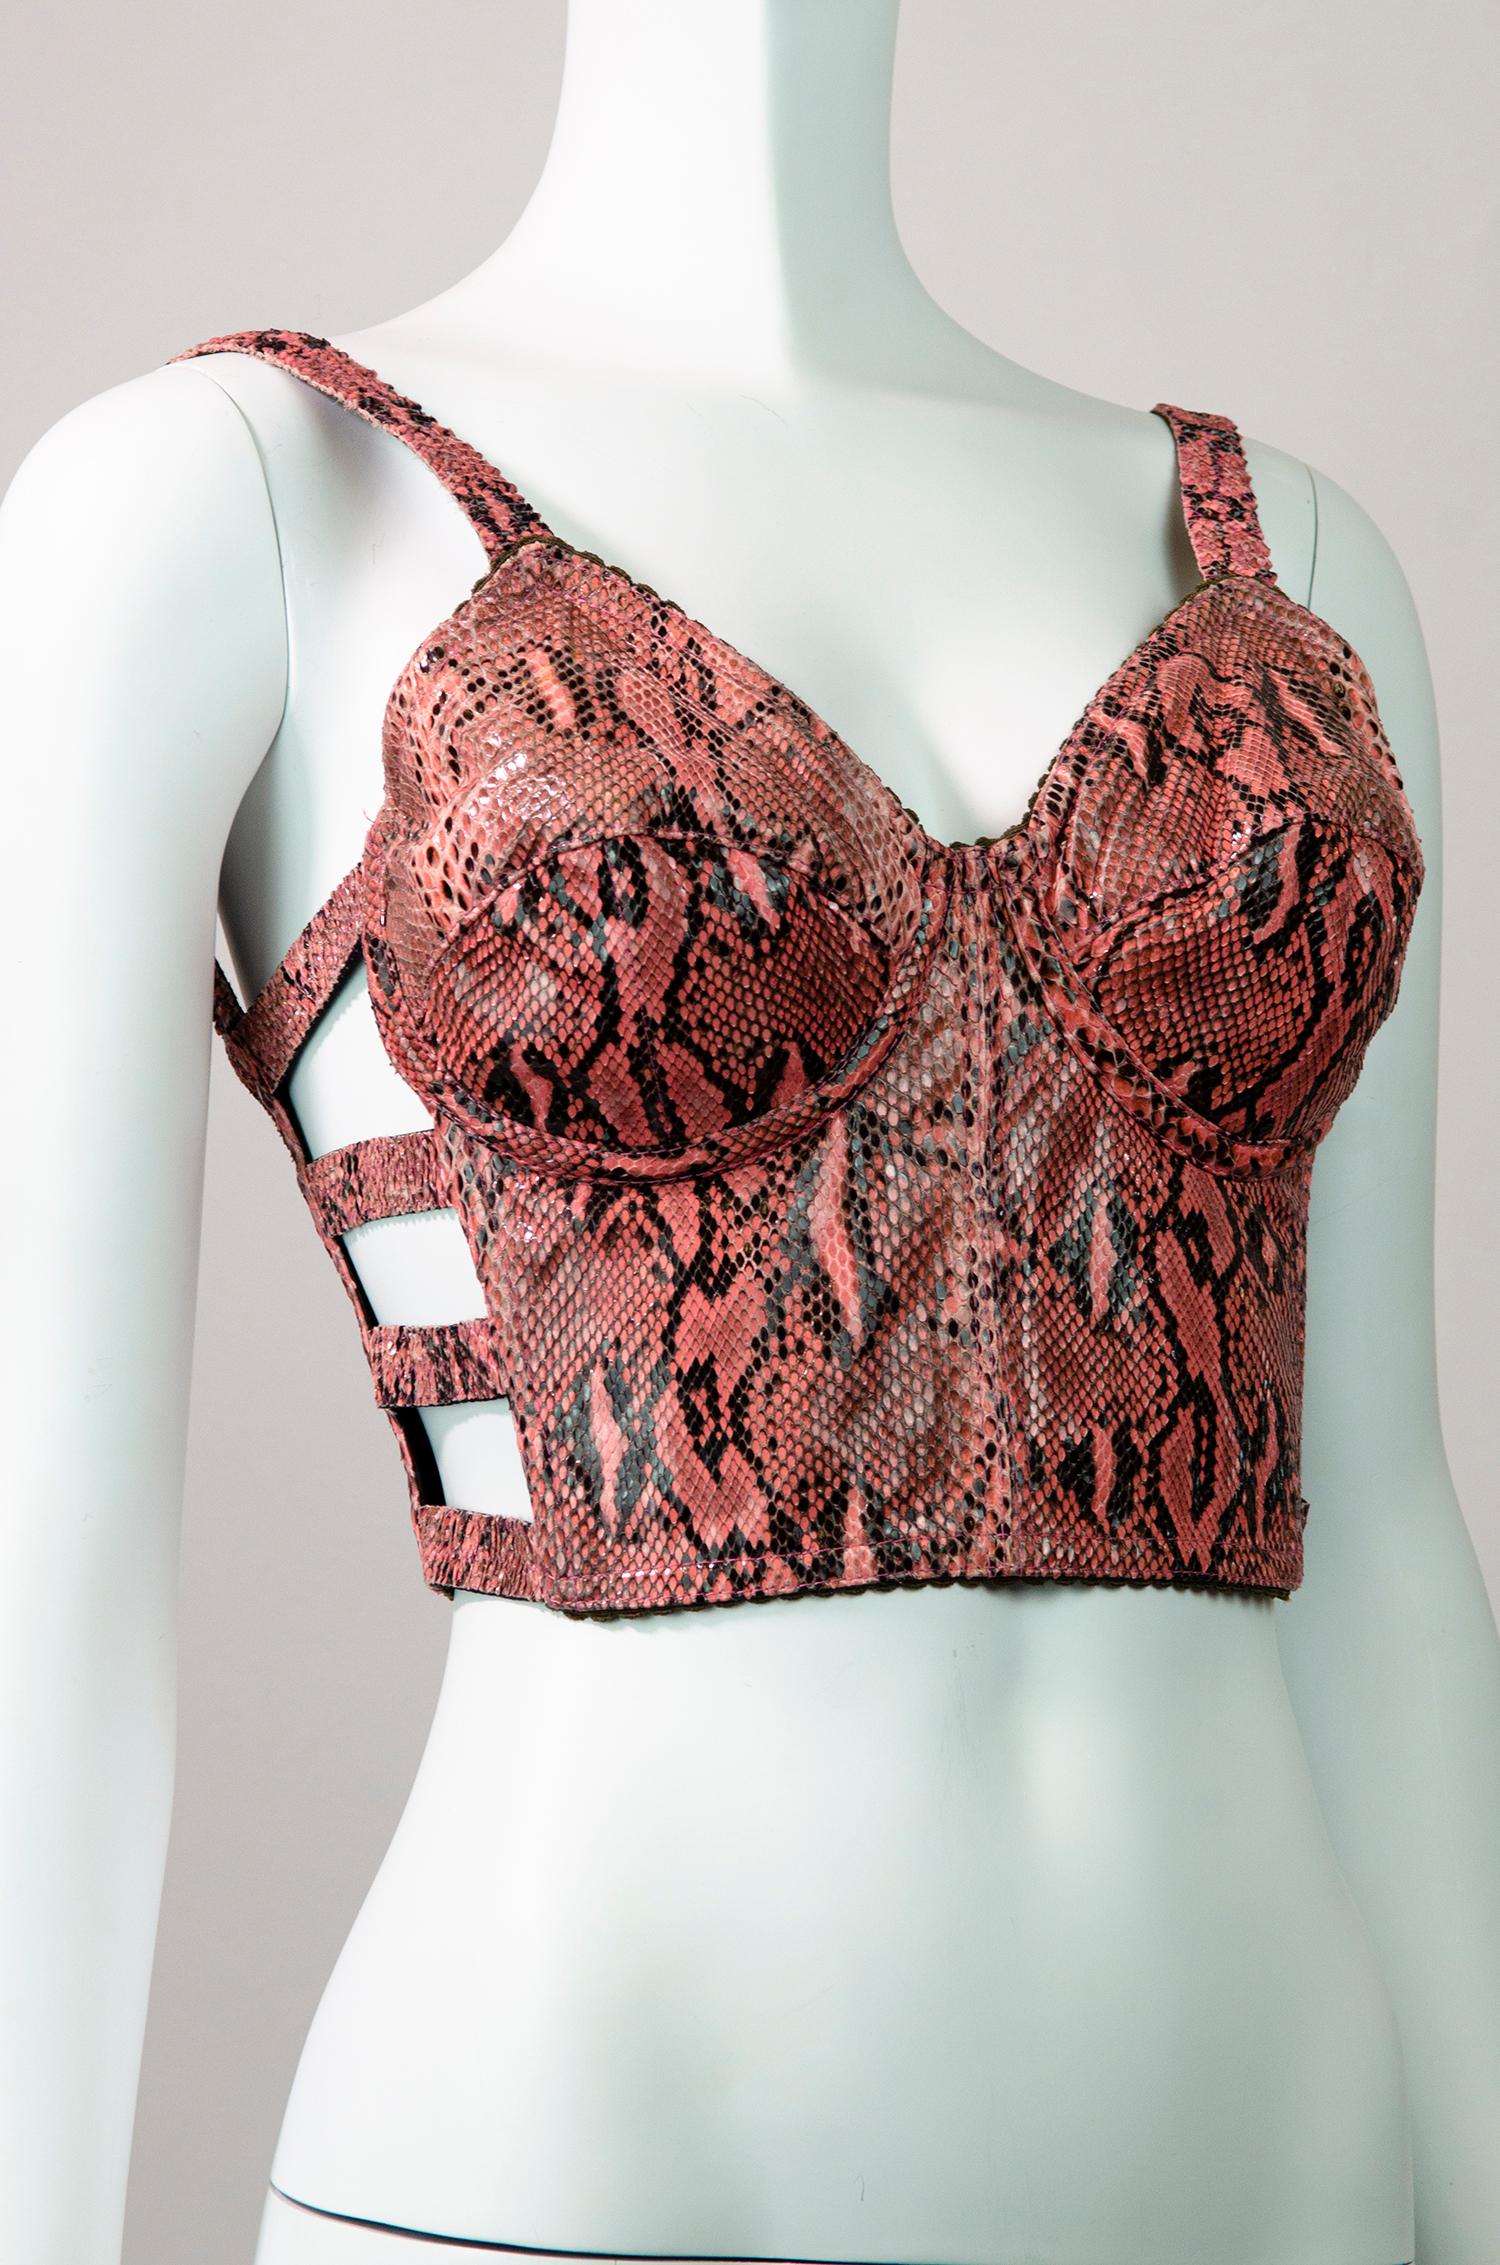 JEAN PAUL GAULTIER S/S 91 Vintage Python Bustier / Corset In Excellent Condition For Sale In Berlin, BE